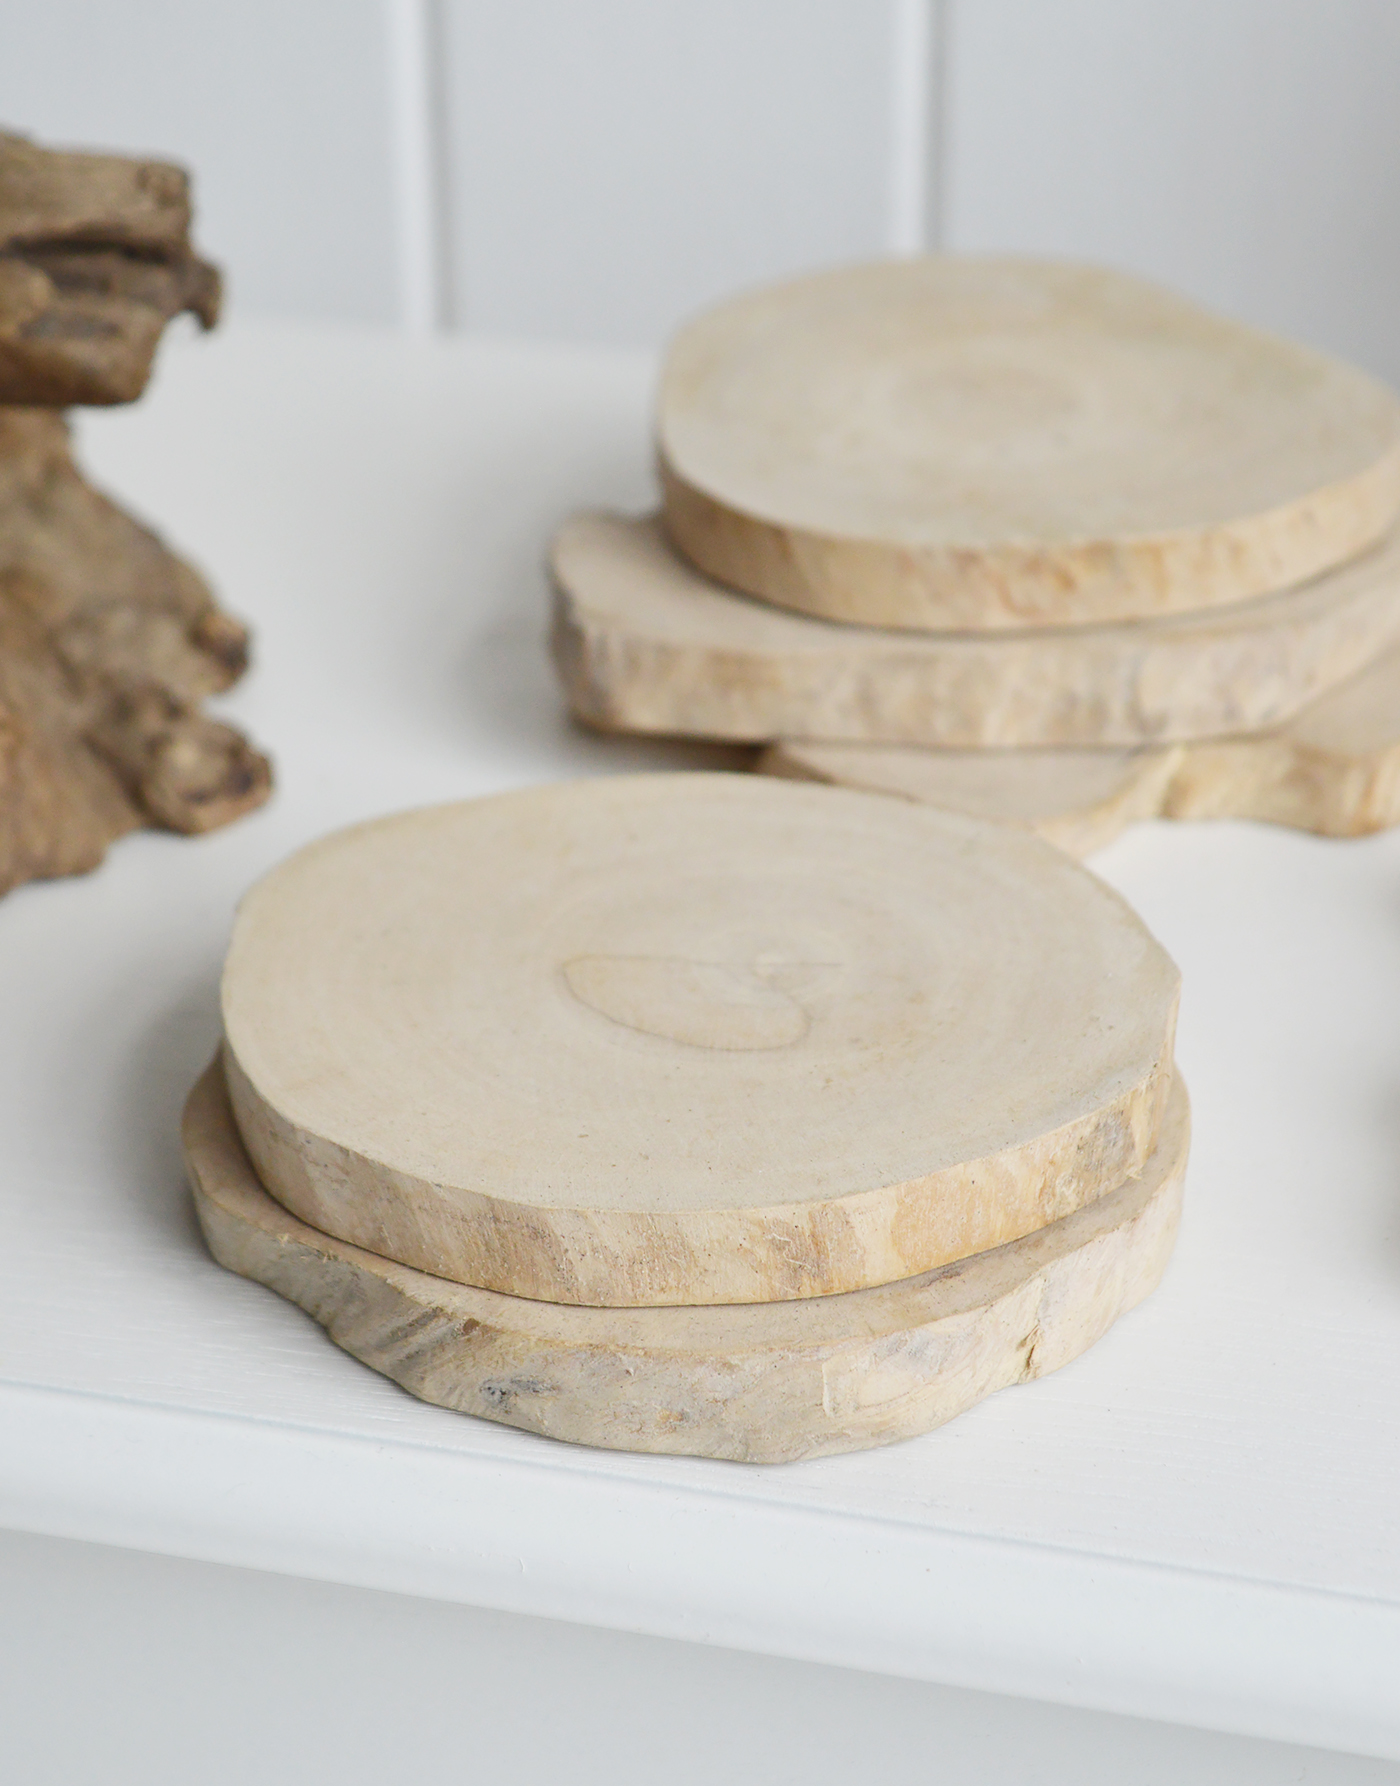 Drfitwood Coasters - New England Country, coastal and Modern Farmhouse Furniture and Interiors